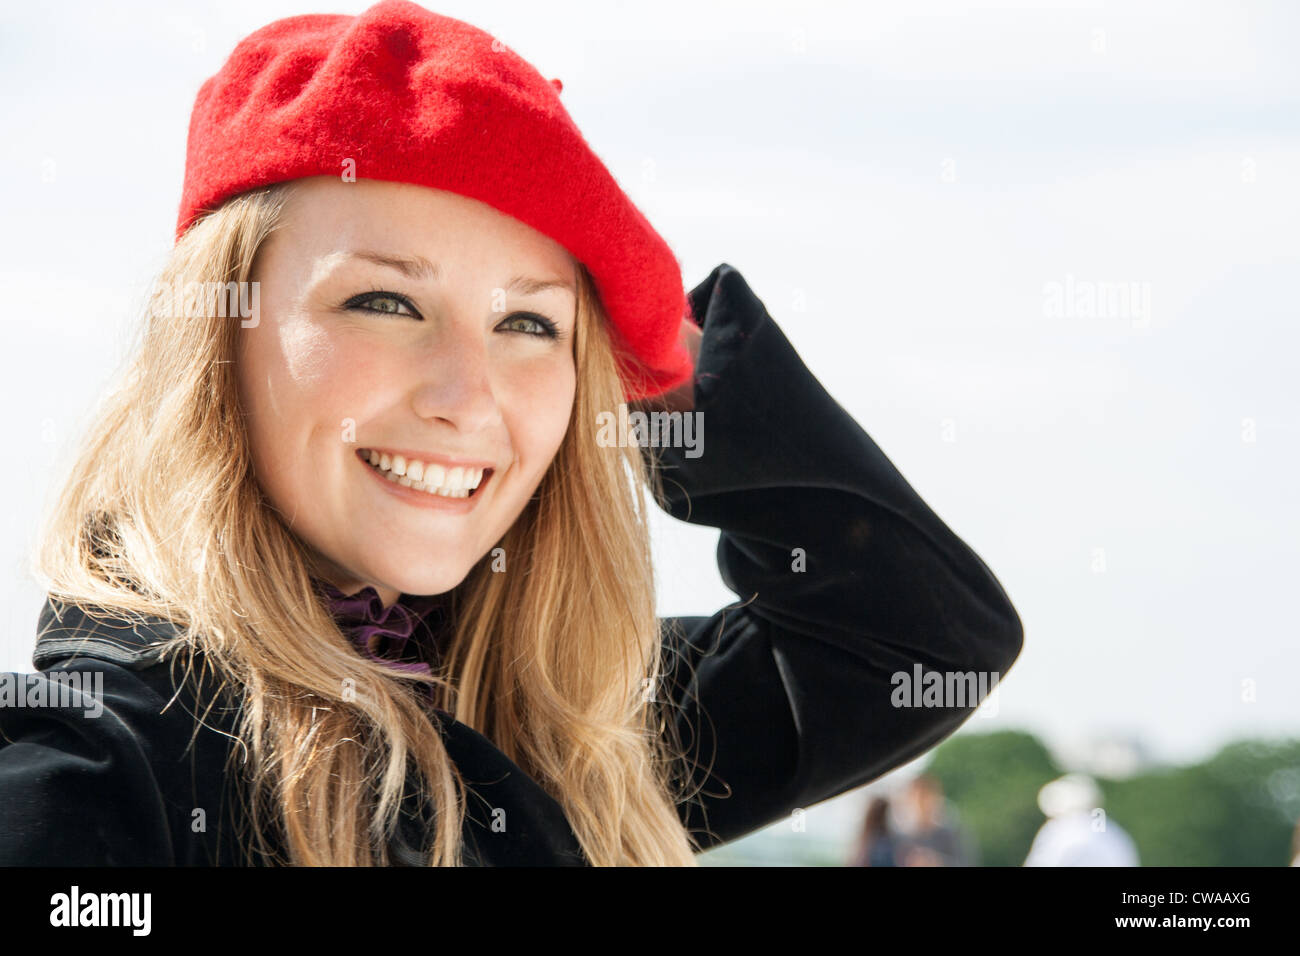 A Beautiful girl, wearing a red hat and smiling. Stock Photo